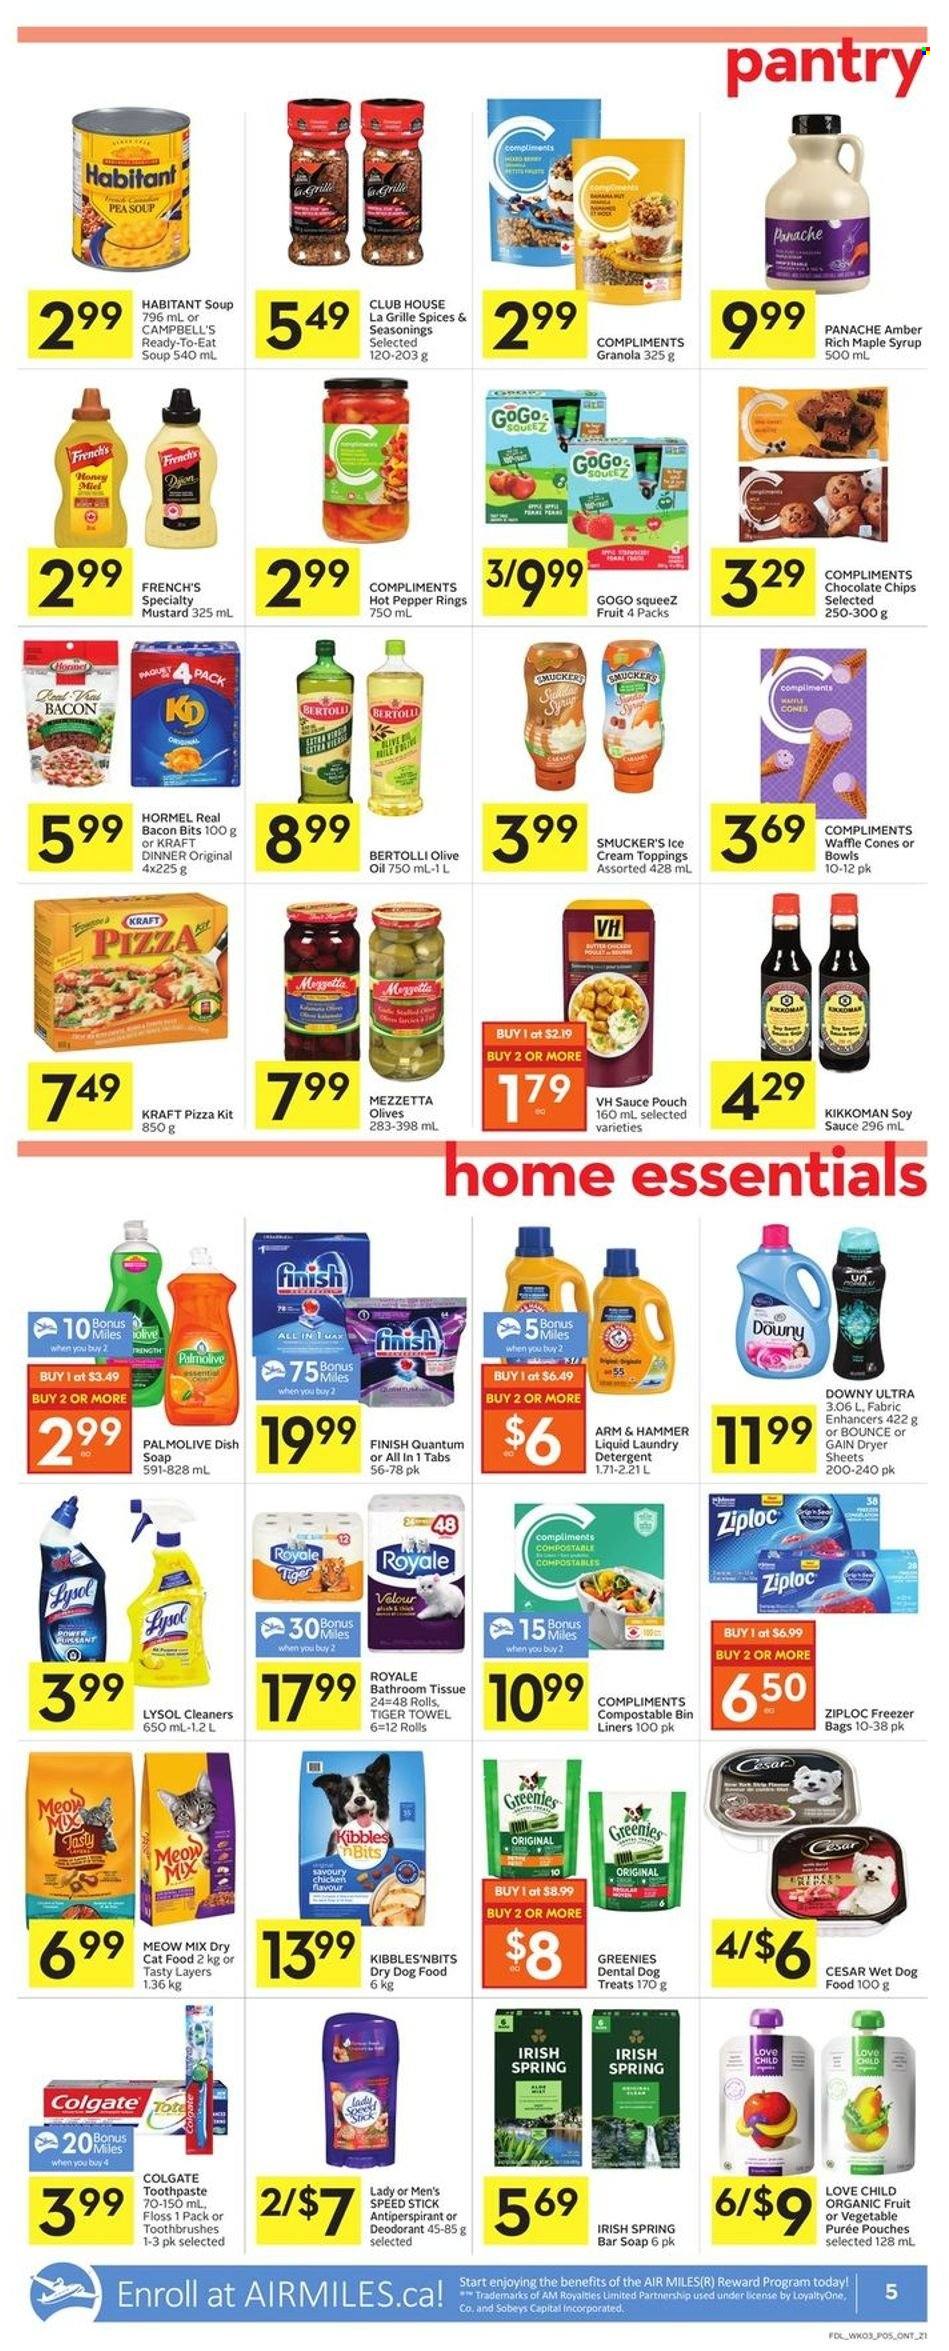 thumbnail - Foodland Flyer - May 19, 2022 - May 25, 2022 - Sales products - Campbell's, pizza, soup, sauce, Kraft®, Bertolli, Hormel, bacon bits, ice cream, ARM & HAMMER, mustard, soy sauce, Kikkoman, olive oil, oil, maple syrup, honey, syrup, baby food pouch, detergent, Colgate, granola, olives, deodorant. Page 5.